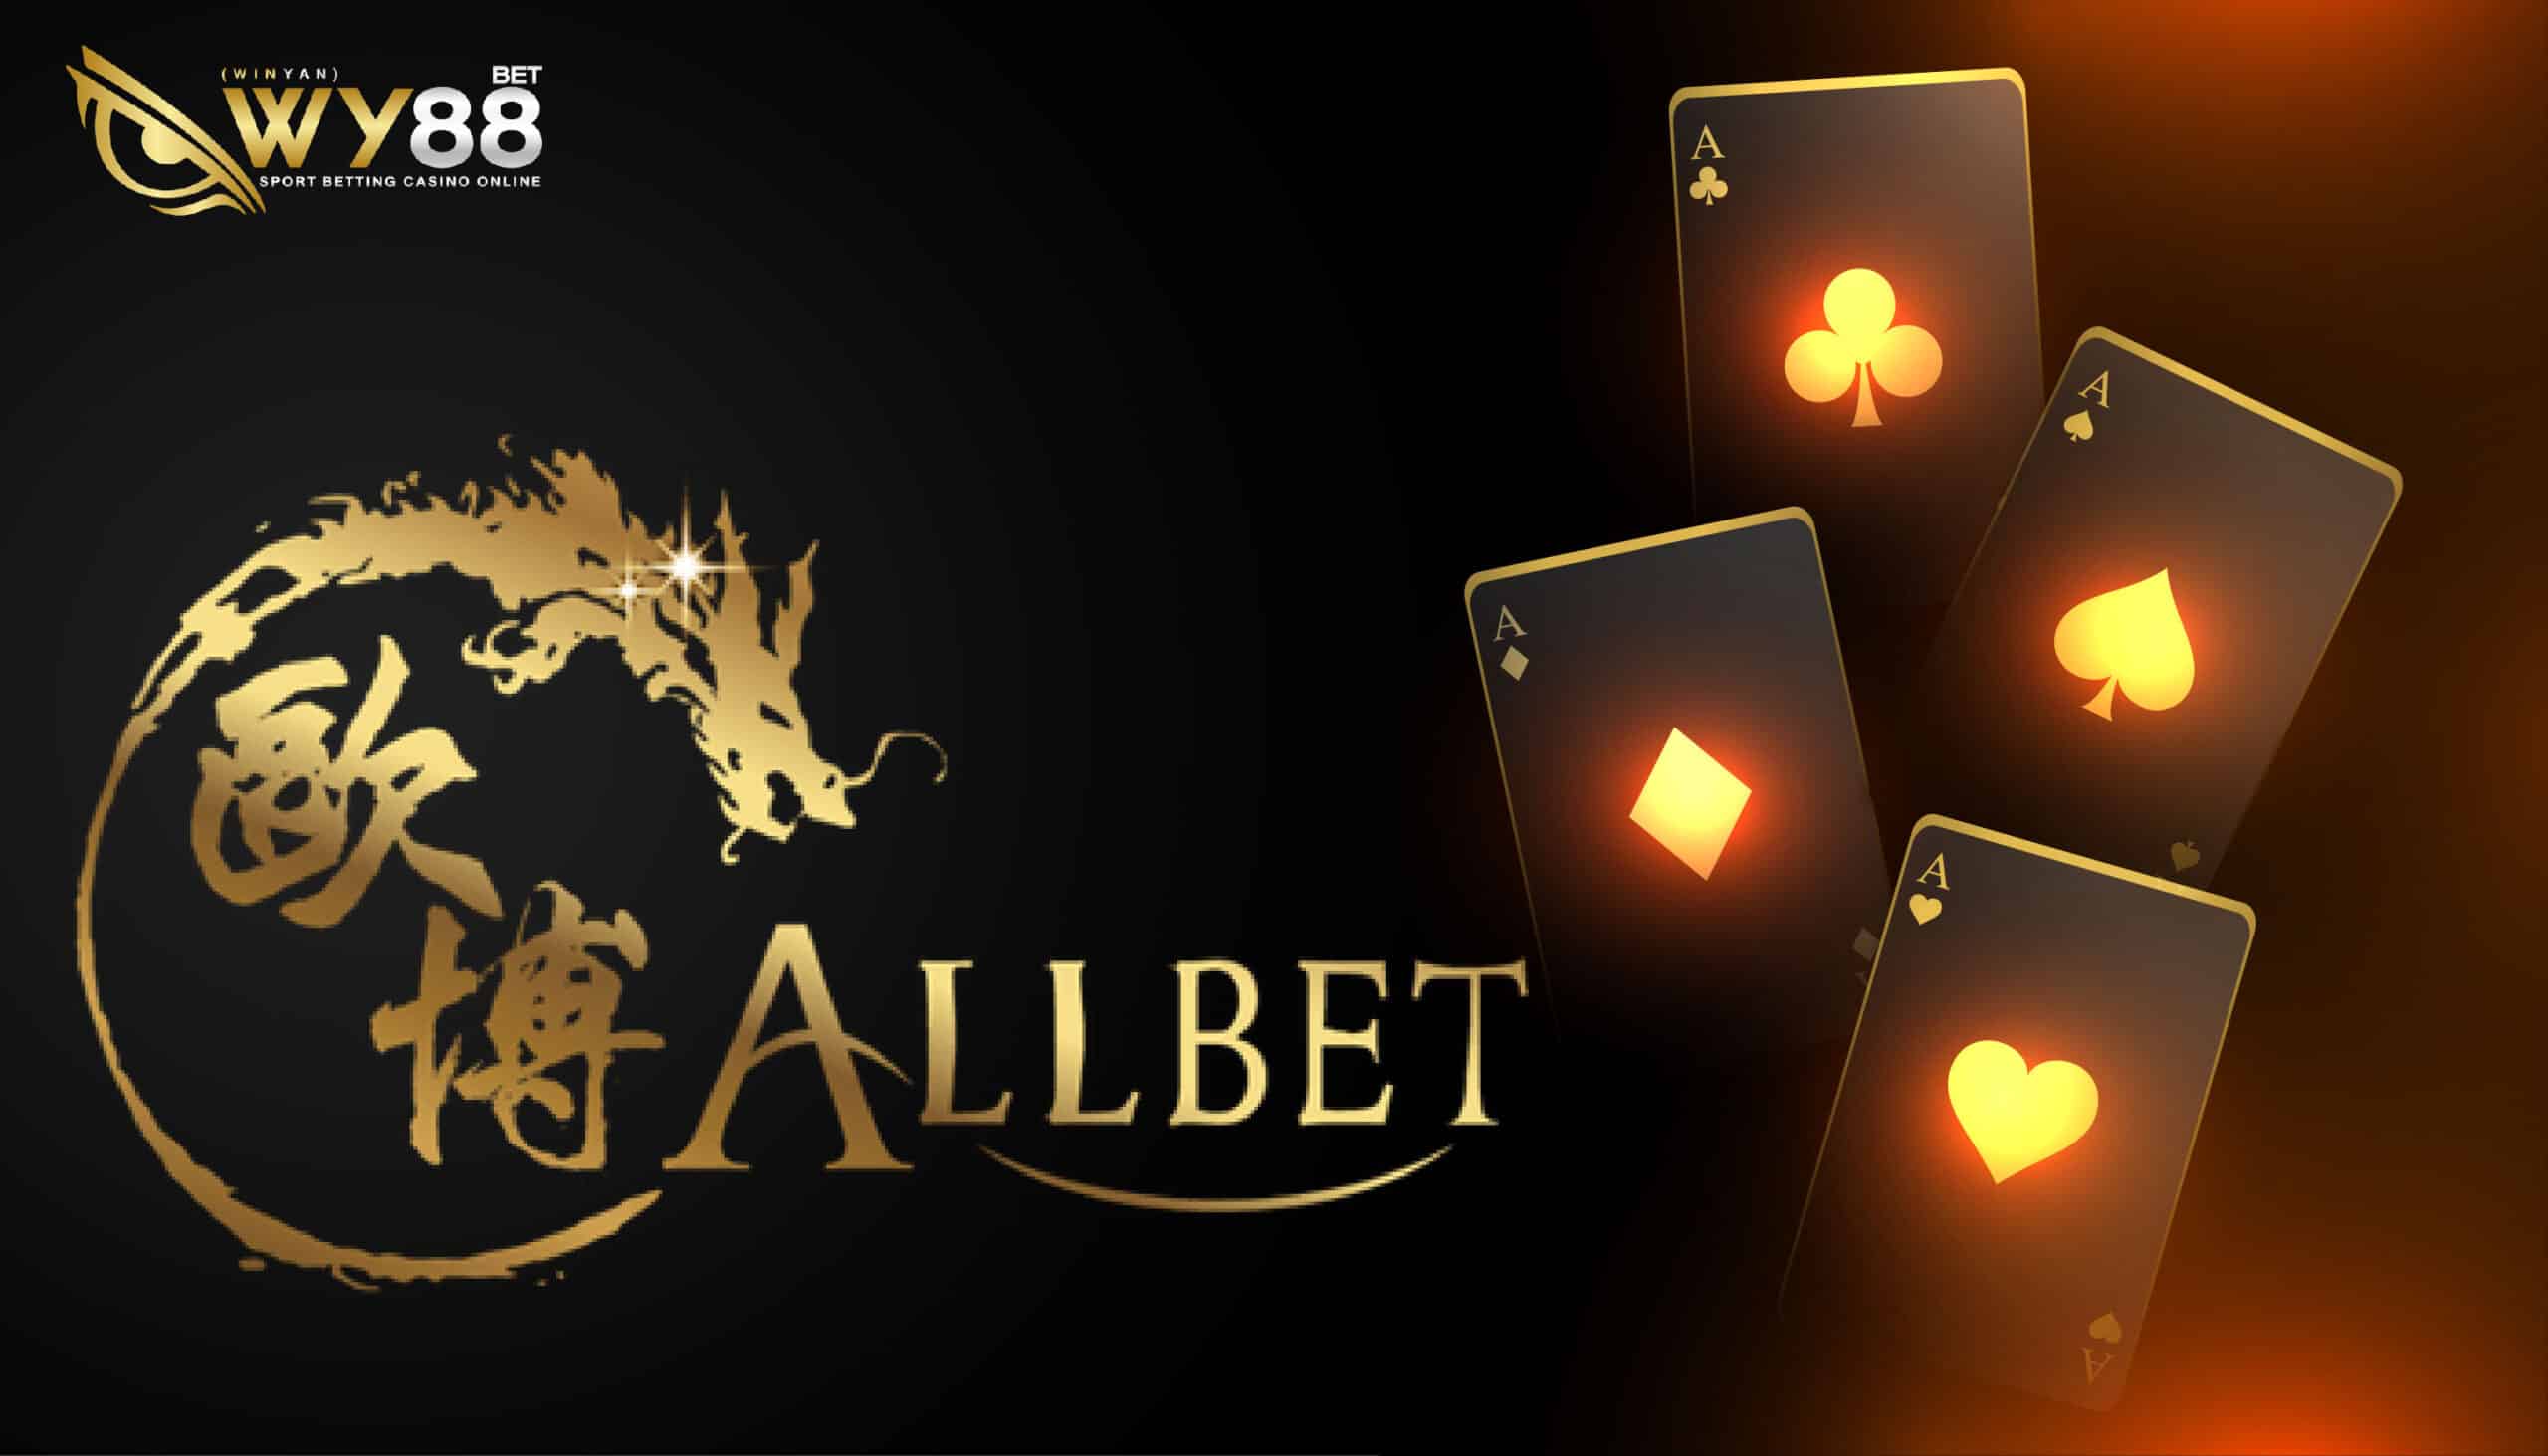 WY88BETS - Allbet - 01